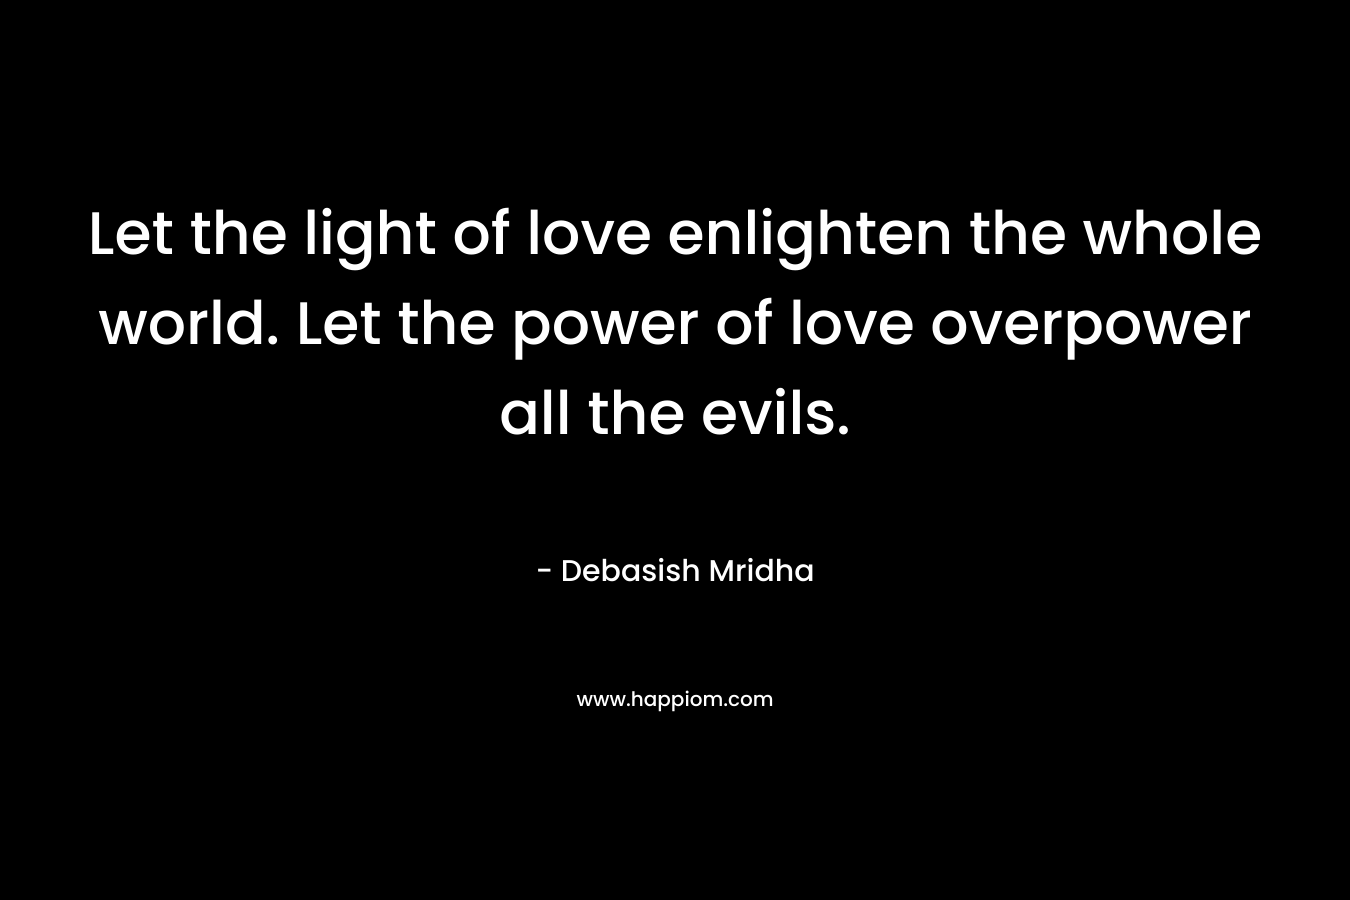 Let the light of love enlighten the whole world. Let the power of love overpower all the evils.